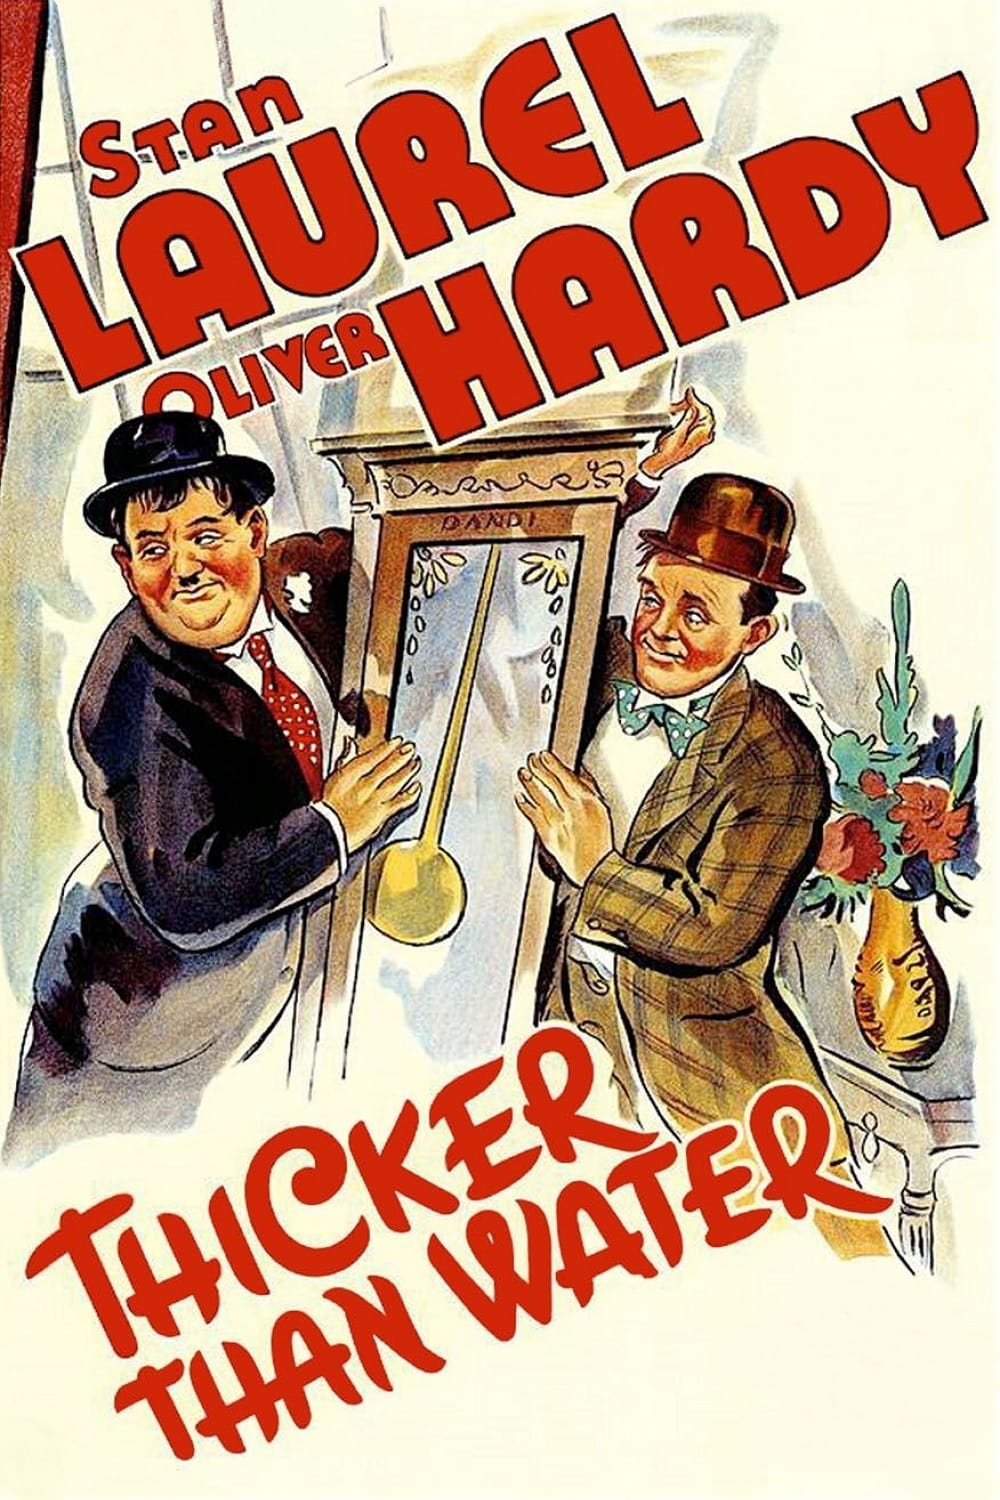 Thicker Than Water (1935)